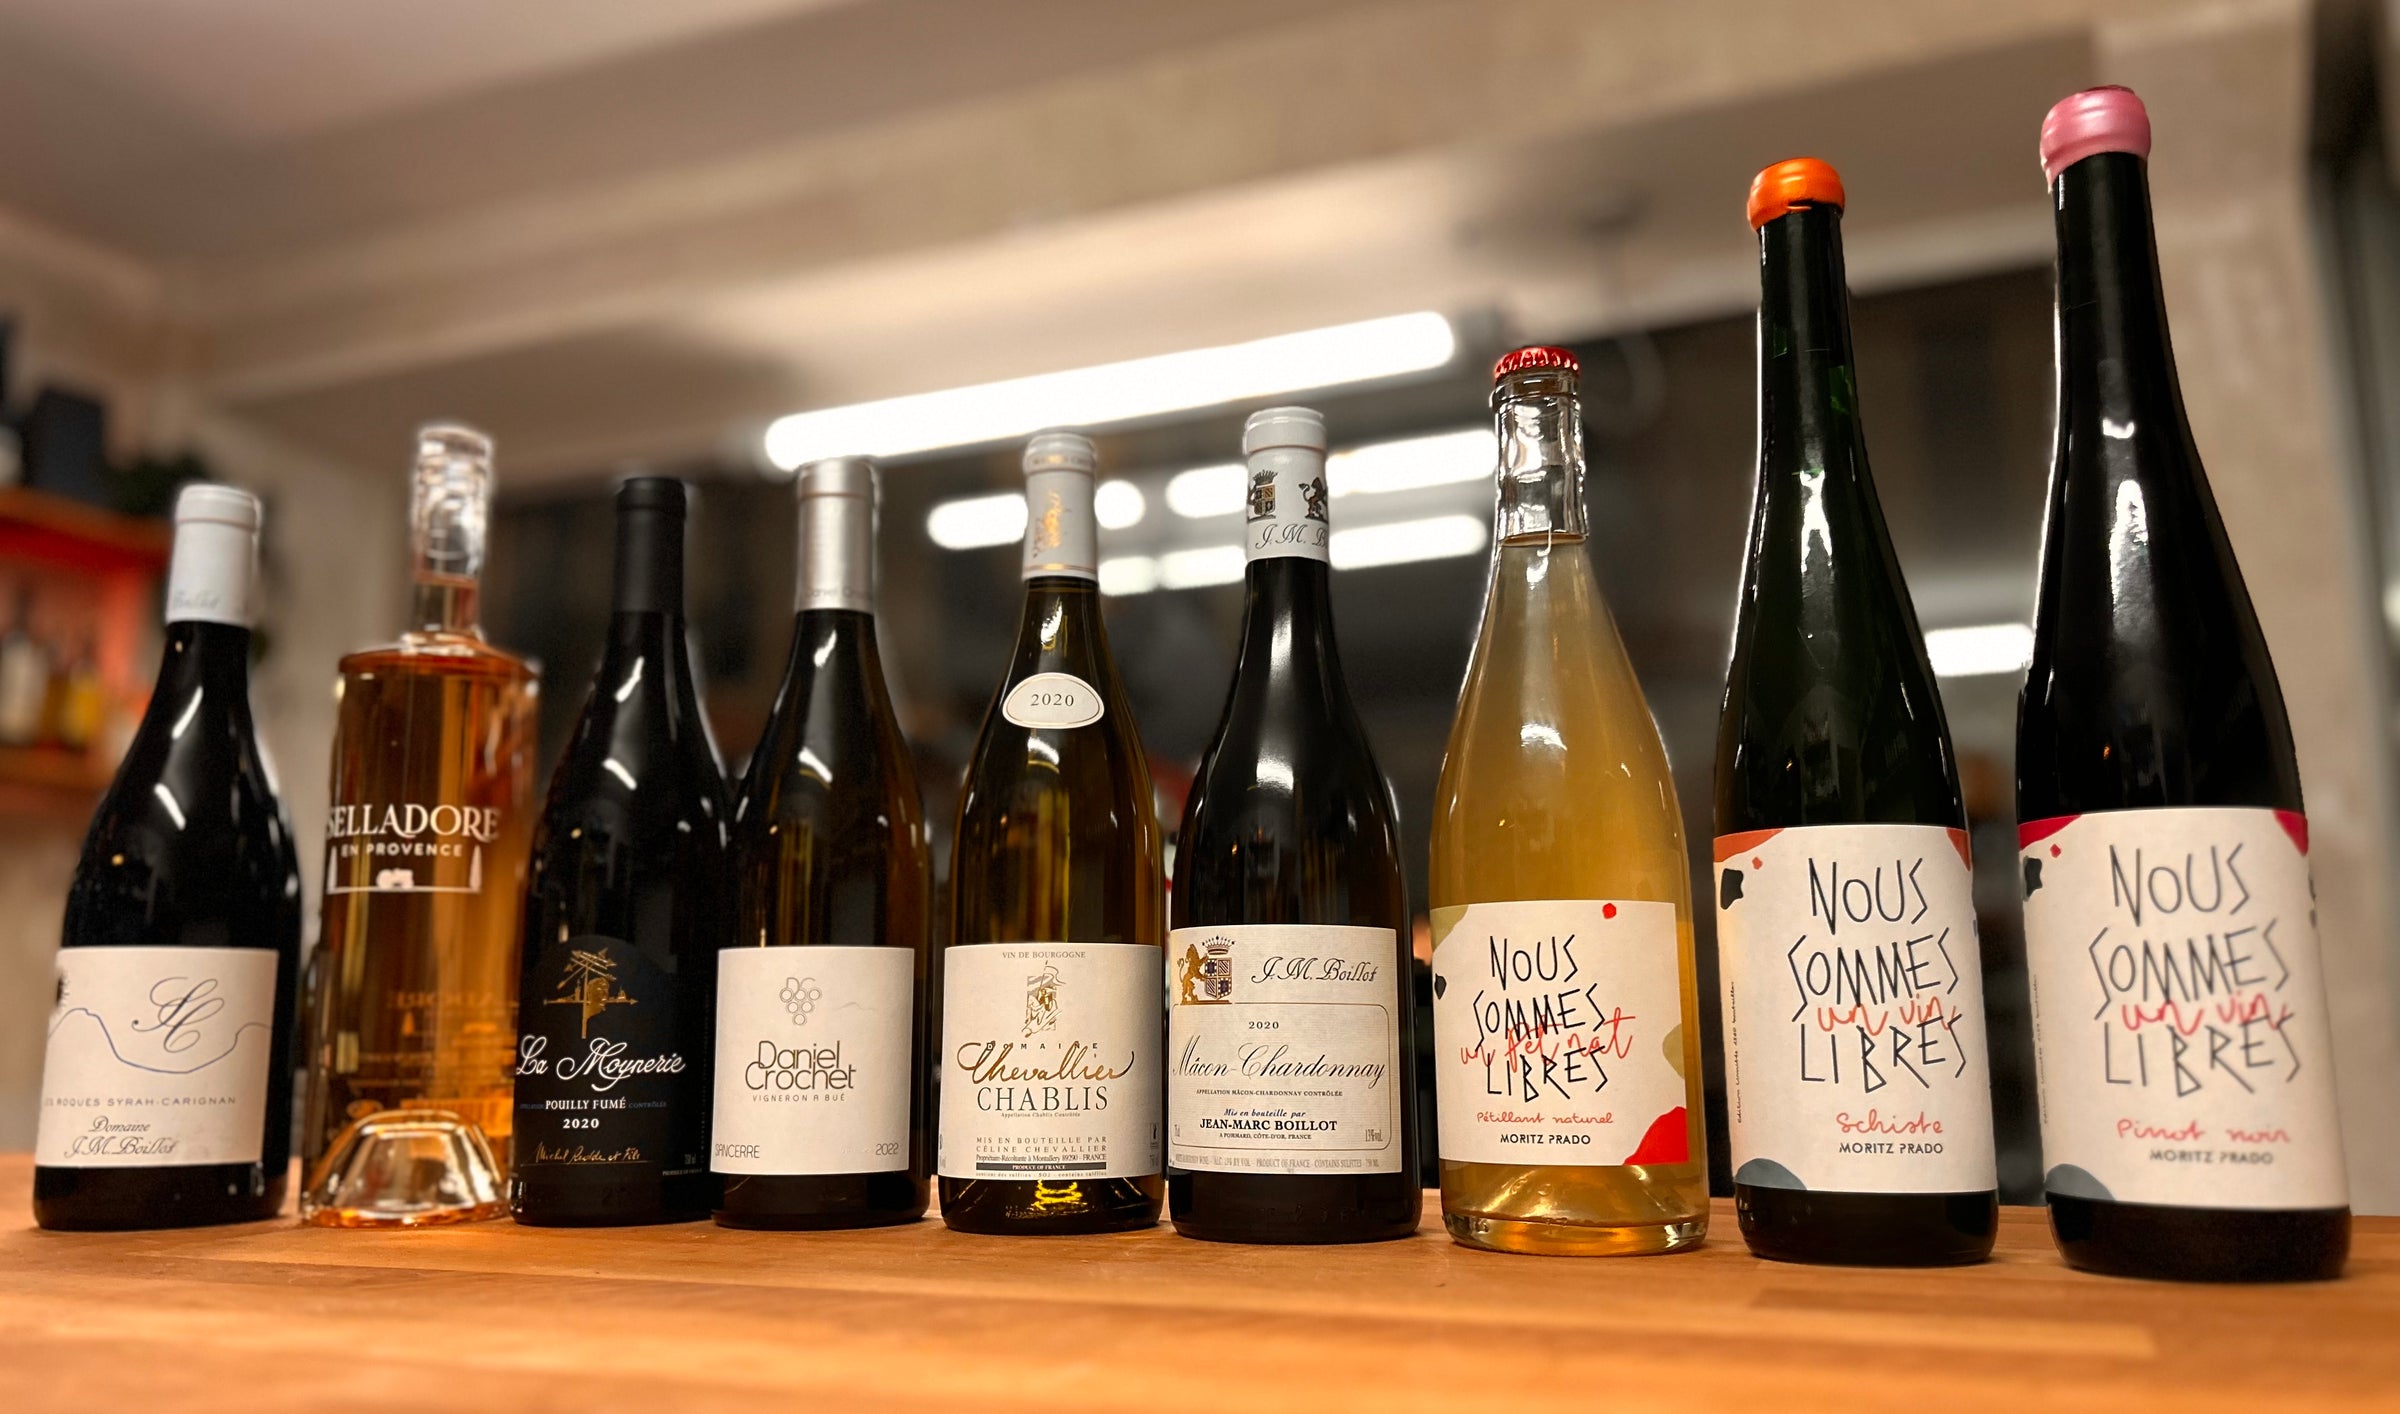 An assortment of nine French wines displayed on a rustic wooden table, featuring various bottle shapes, colors, and labels representing the diverse regions and flavors of French wine culture.